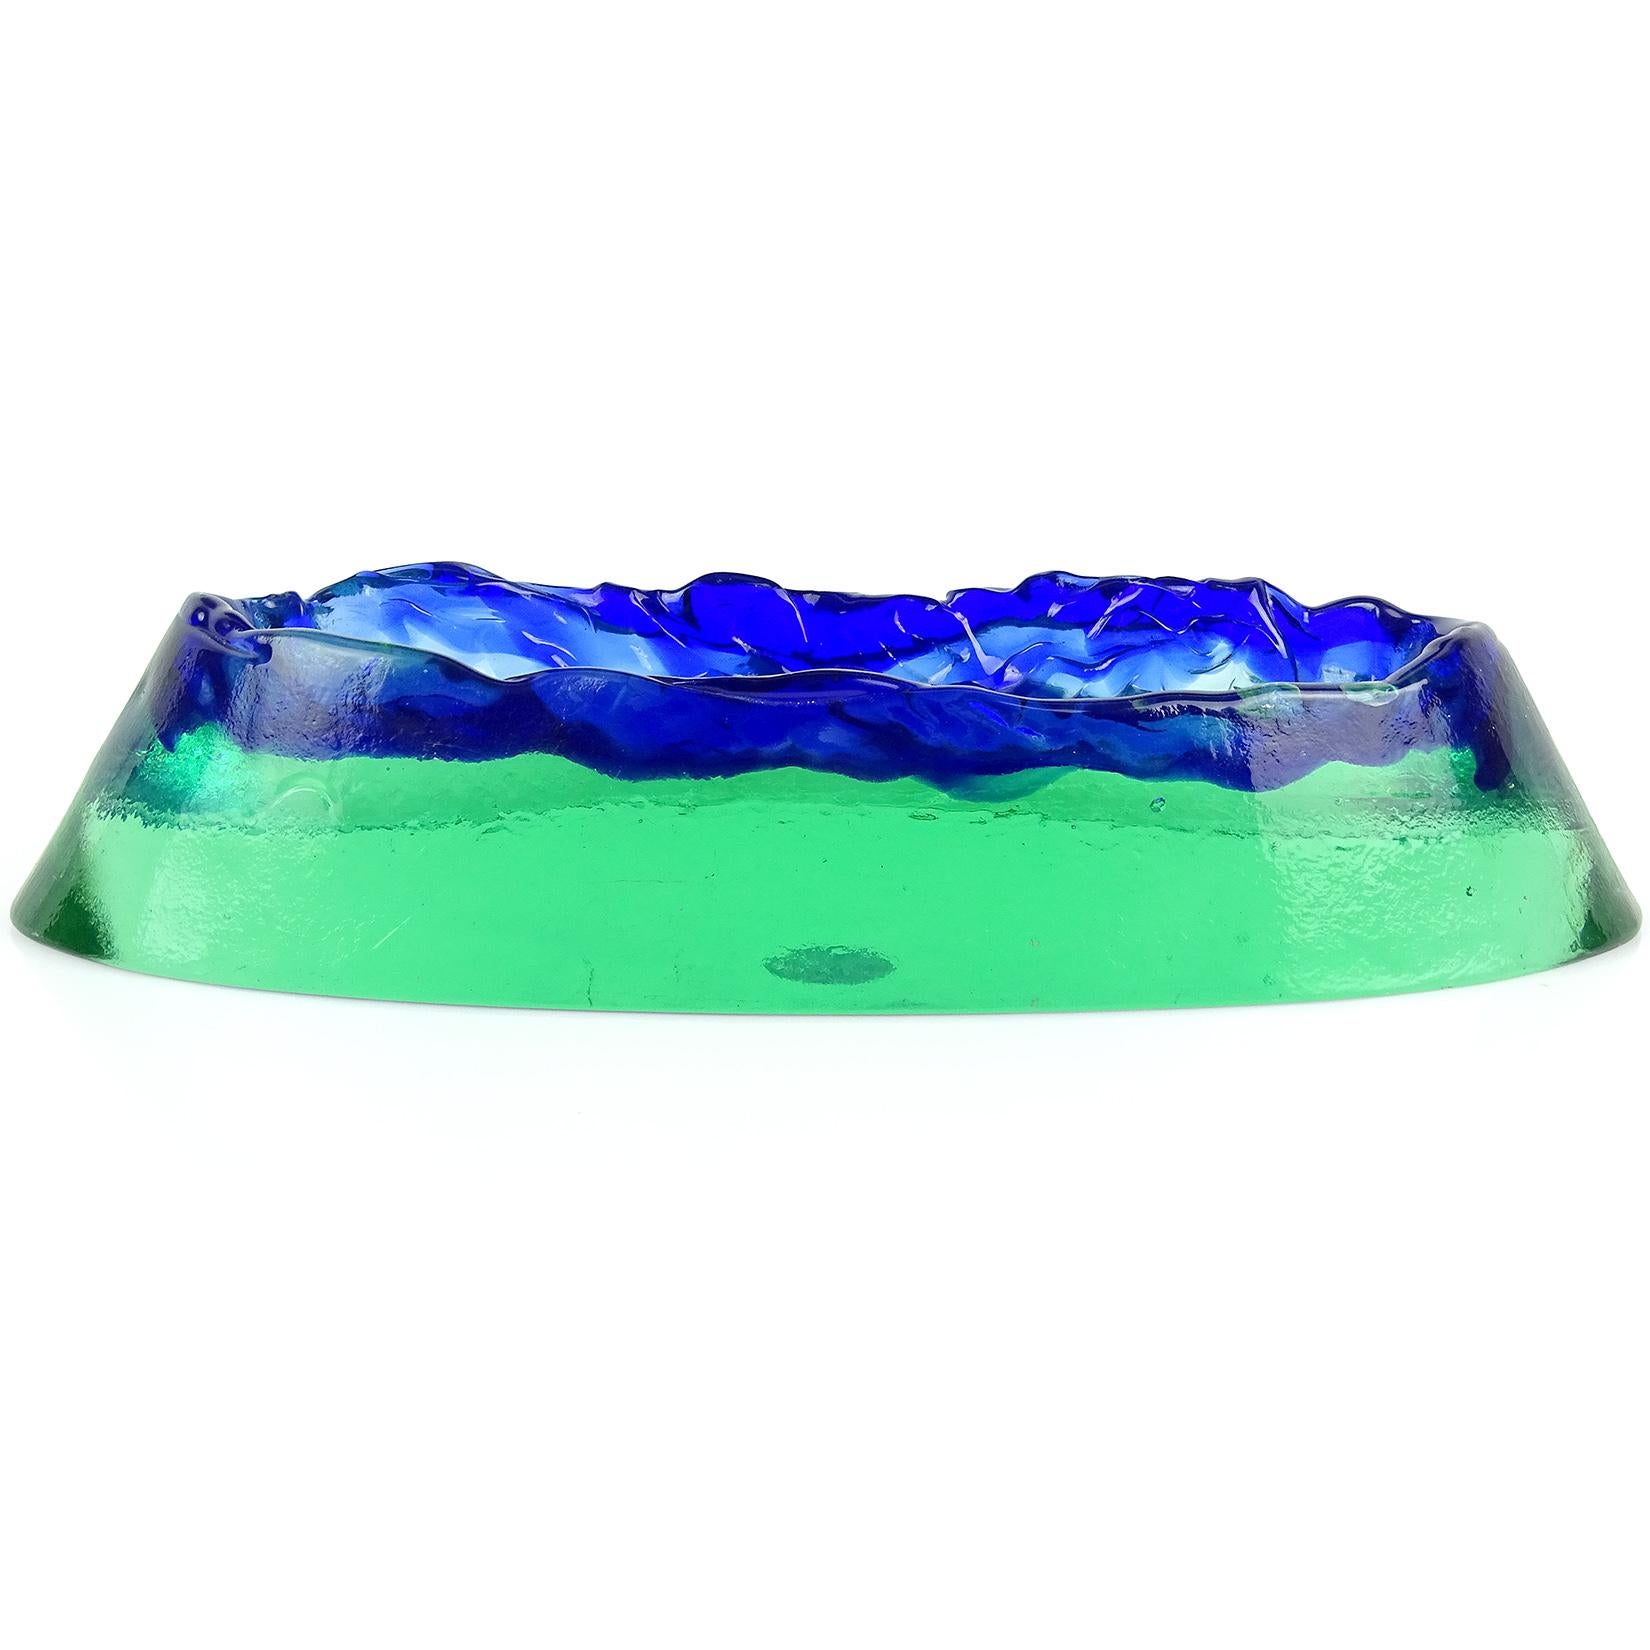 Beautiful vintage Murano hand blown blue and green Sommerso volcano island, with mountain range rim Italian art glass sculptural bowl. Documented to the Salviati Company. Original label fell off a few years back, so what you see as a round shadow is